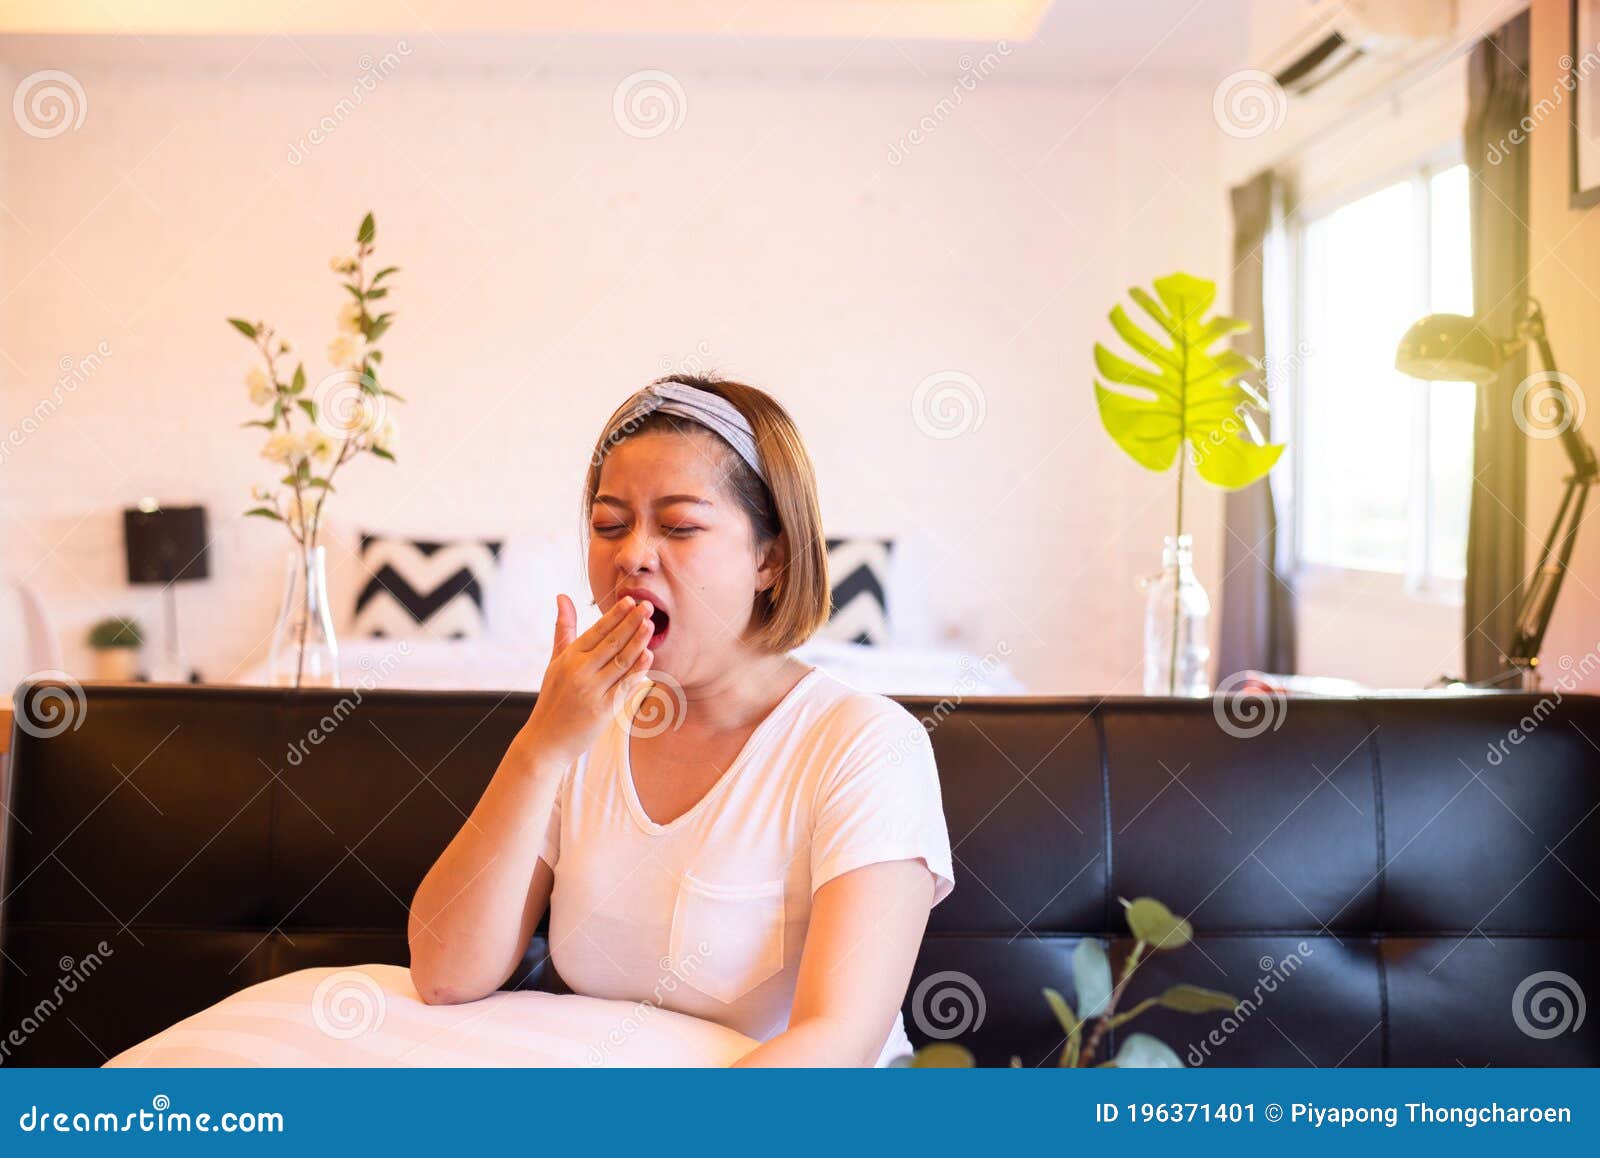 asian woman yawning during sitting on sofa and tired sleepy,female with symptoms sleepiness